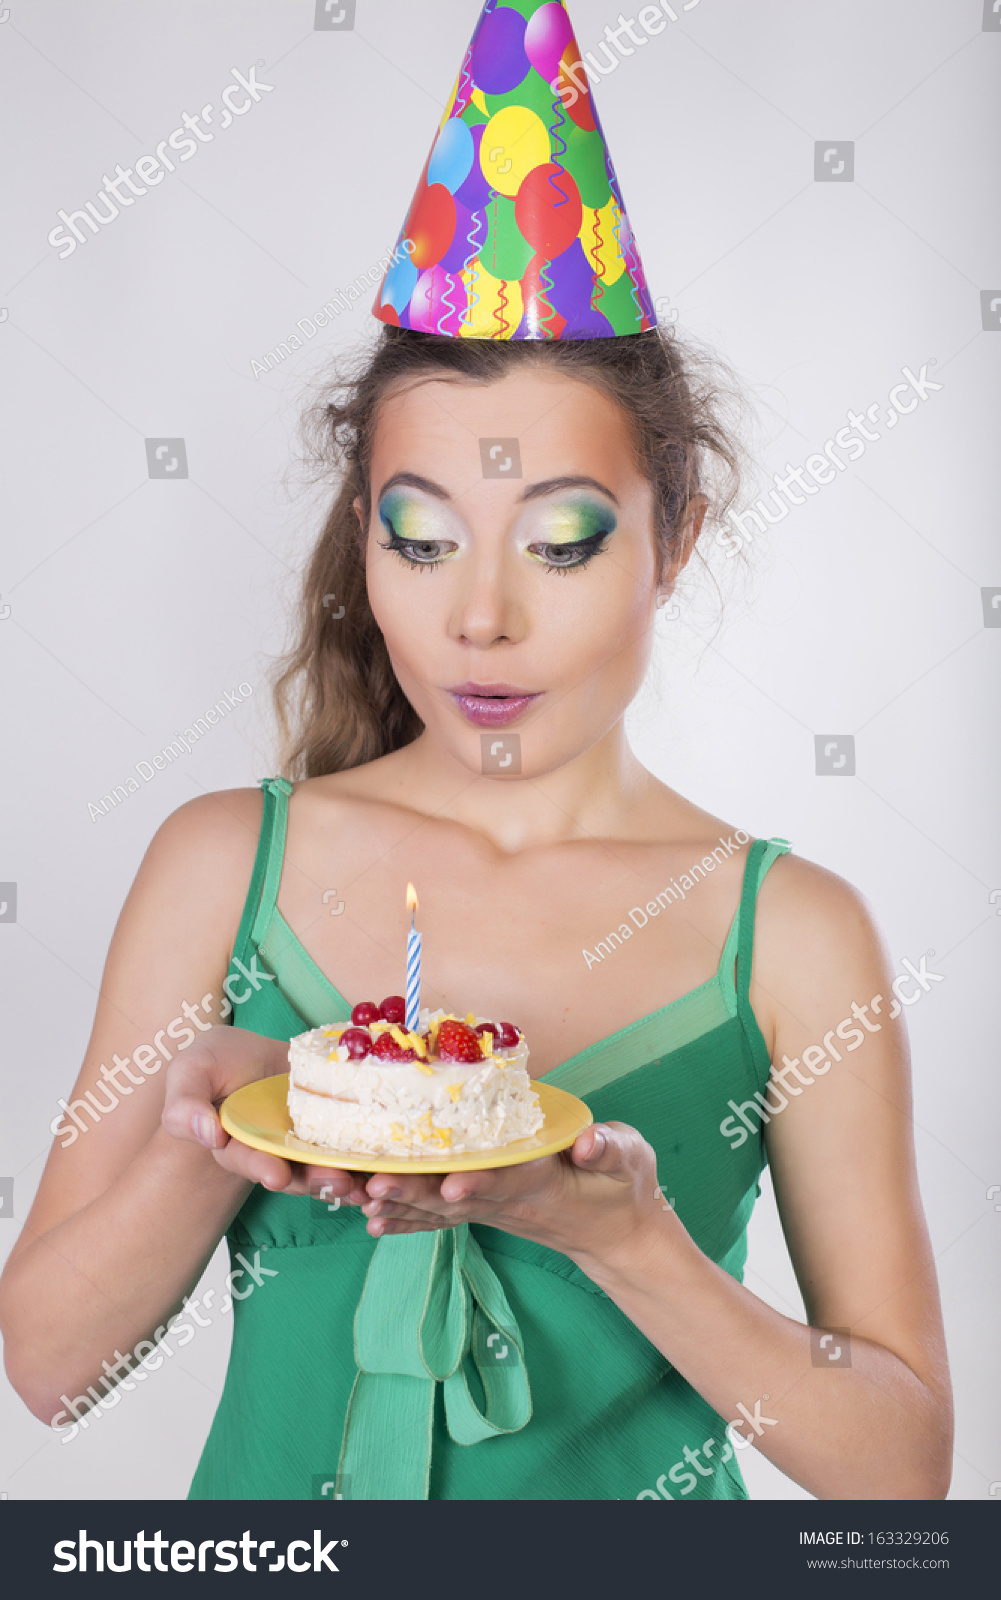 Brunette Woman In A Birthday Cap Holding A Cake And Smile Looking On It ...